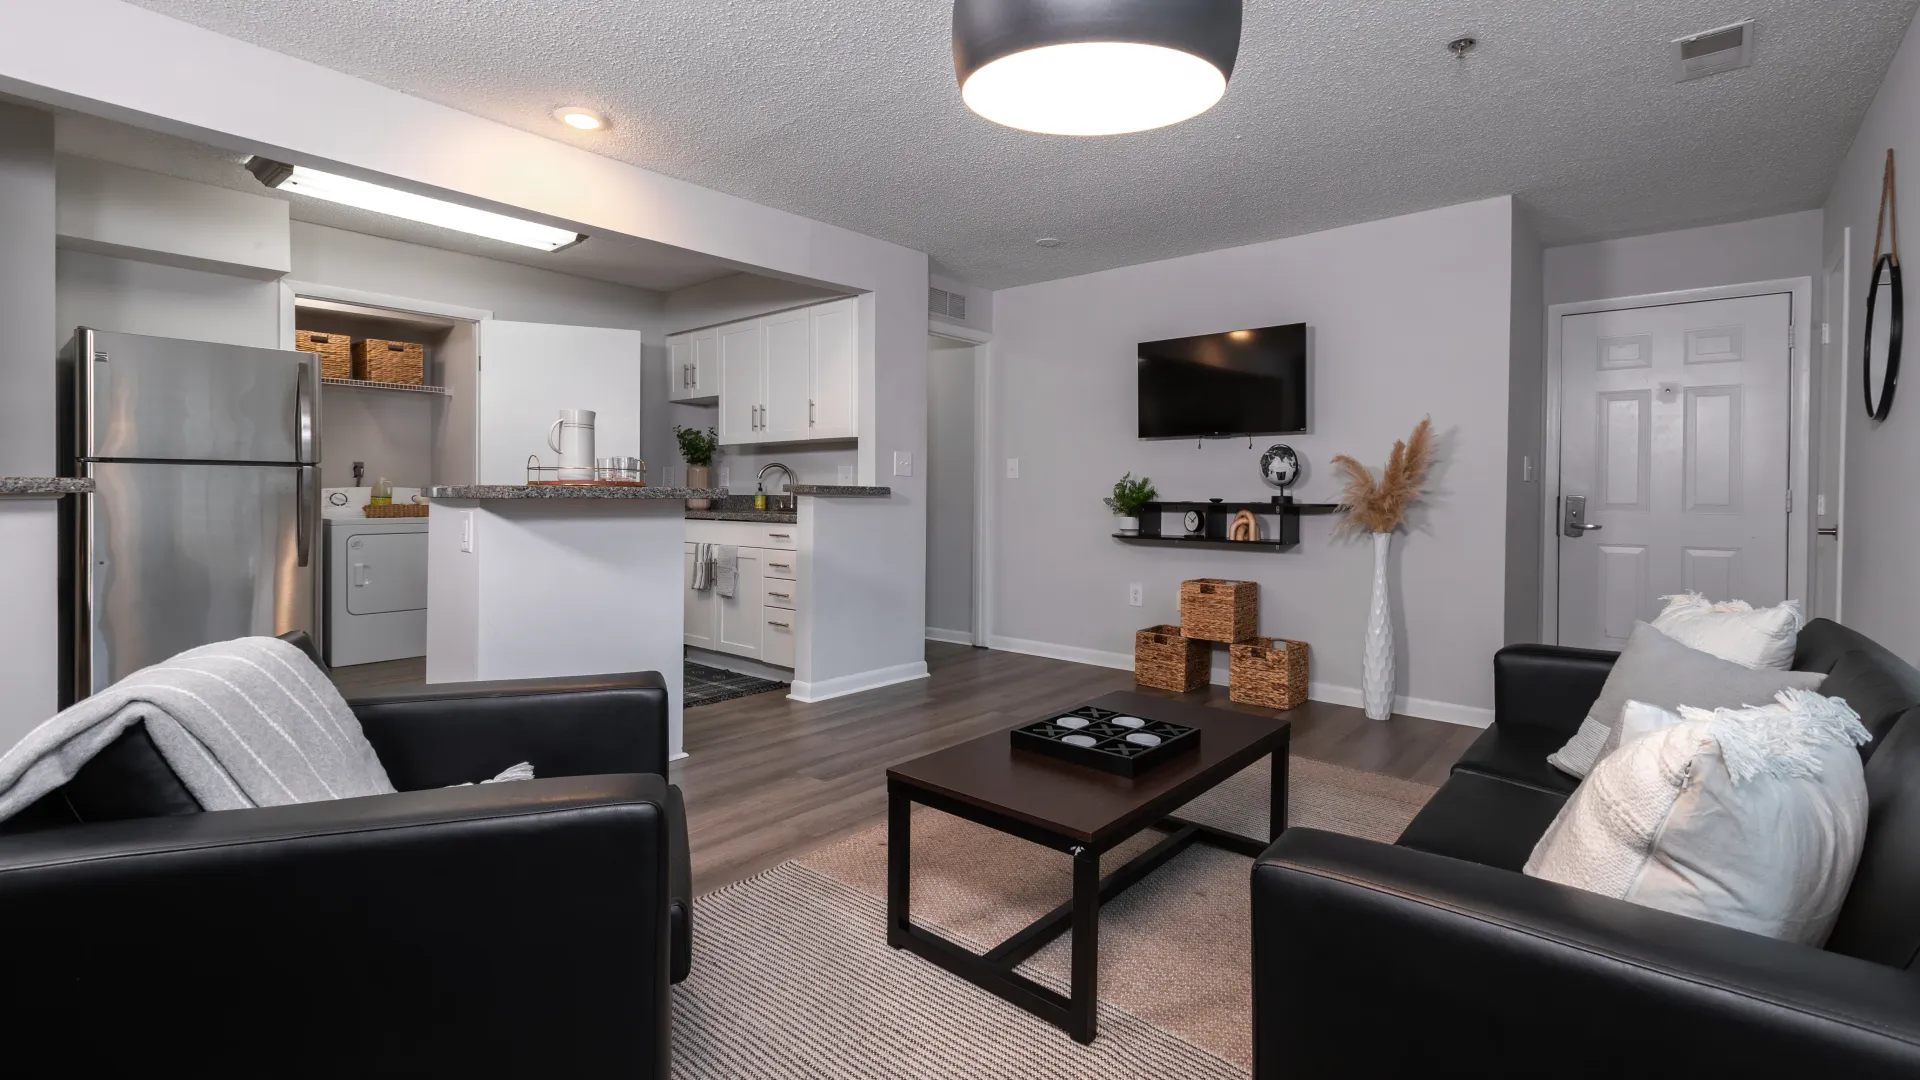 Open-concept living space with black leather seating, wall-mounted TV, modern kitchen with stainless steel appliances, granite countertops, and in-unit laundry area.